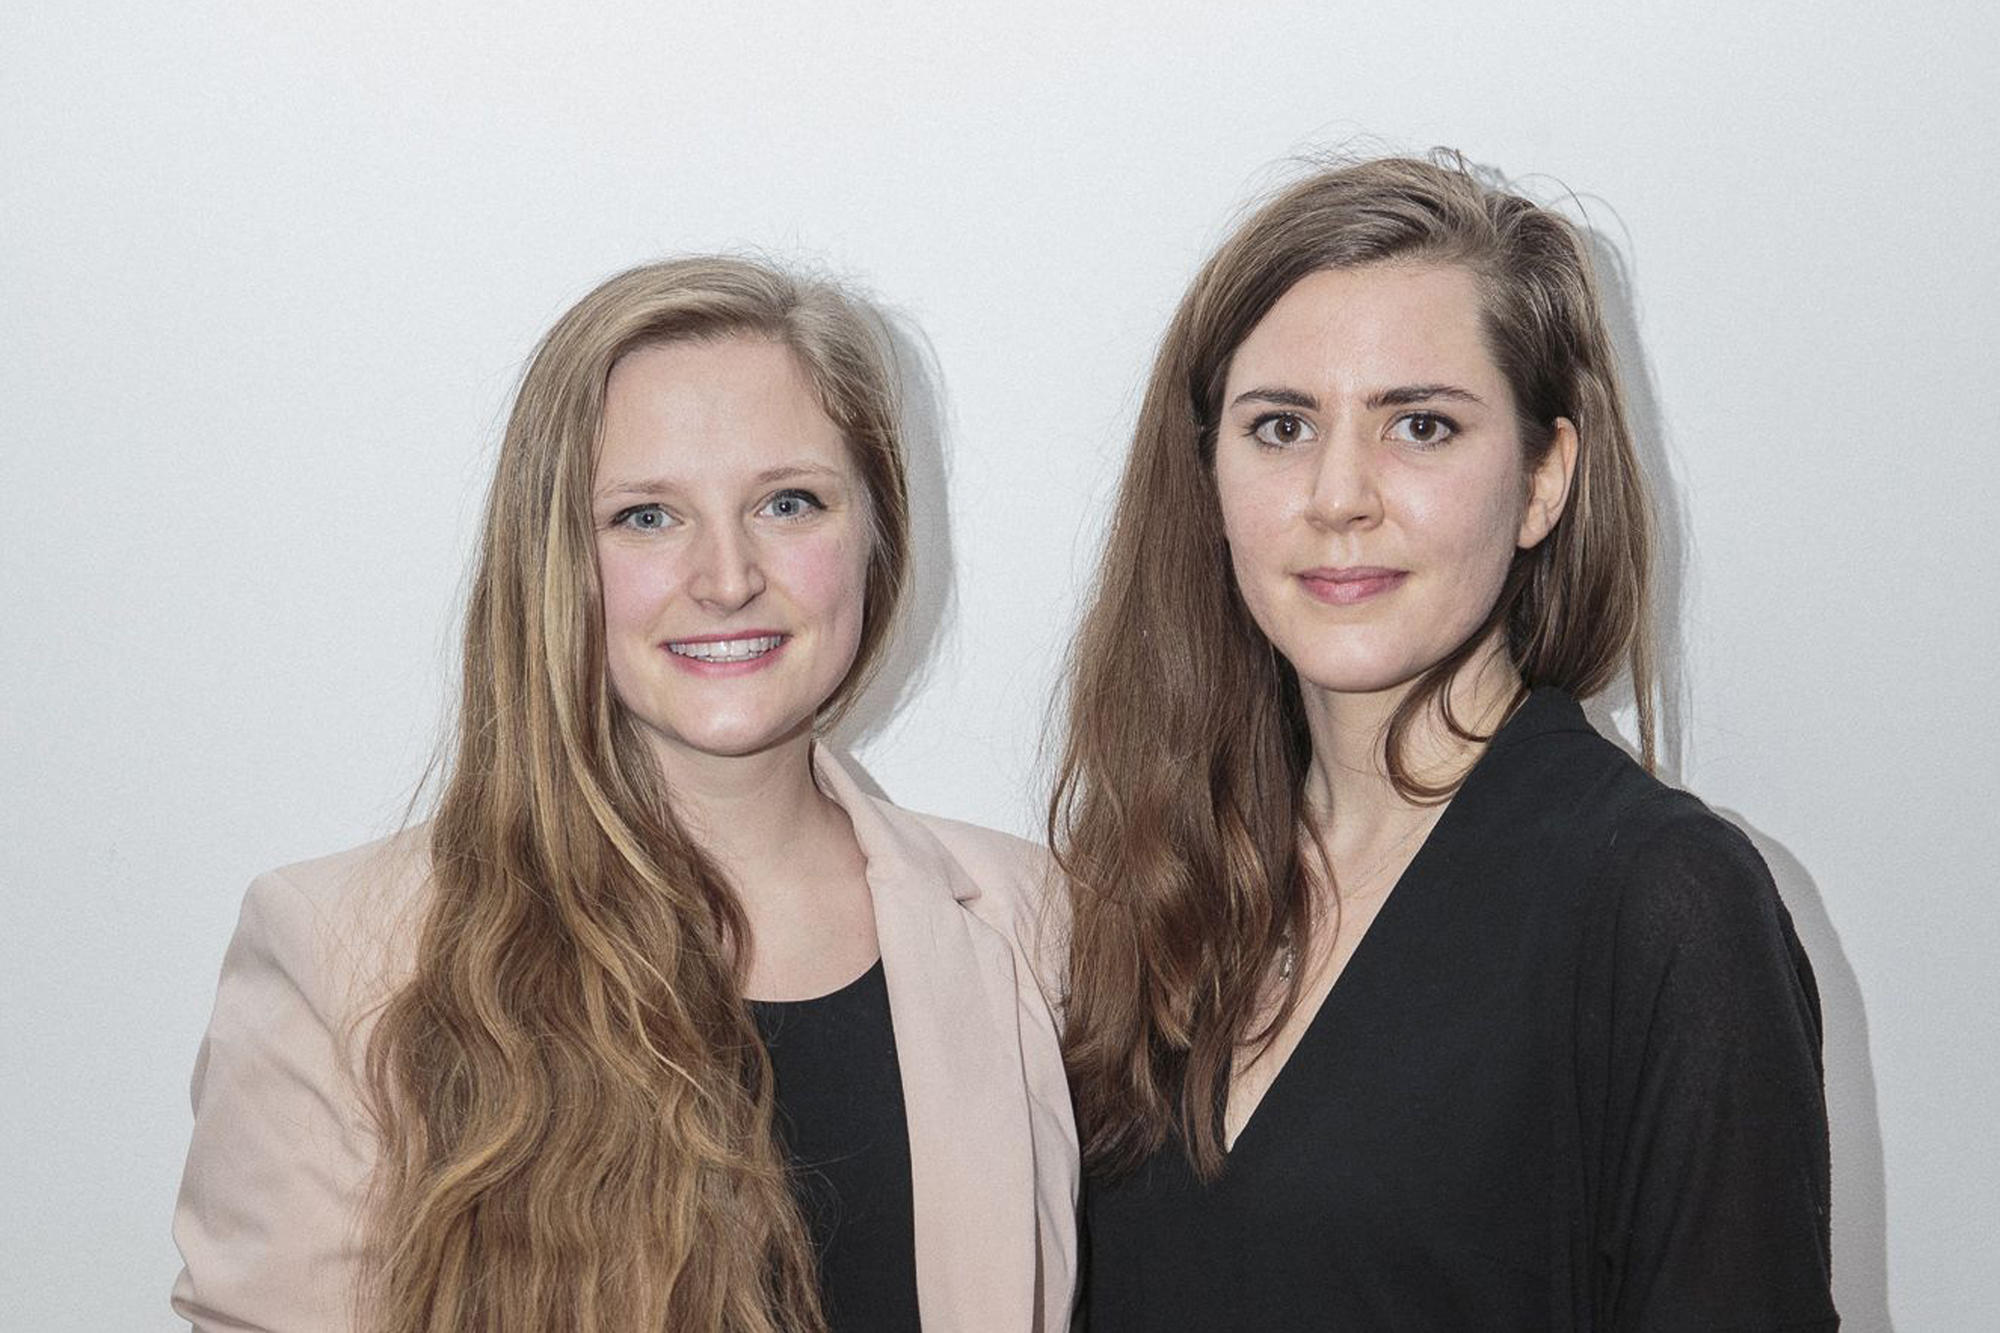 Laura Bücheler and Isabella Hillmer came up with their founding idea called “Ghost – feel it.